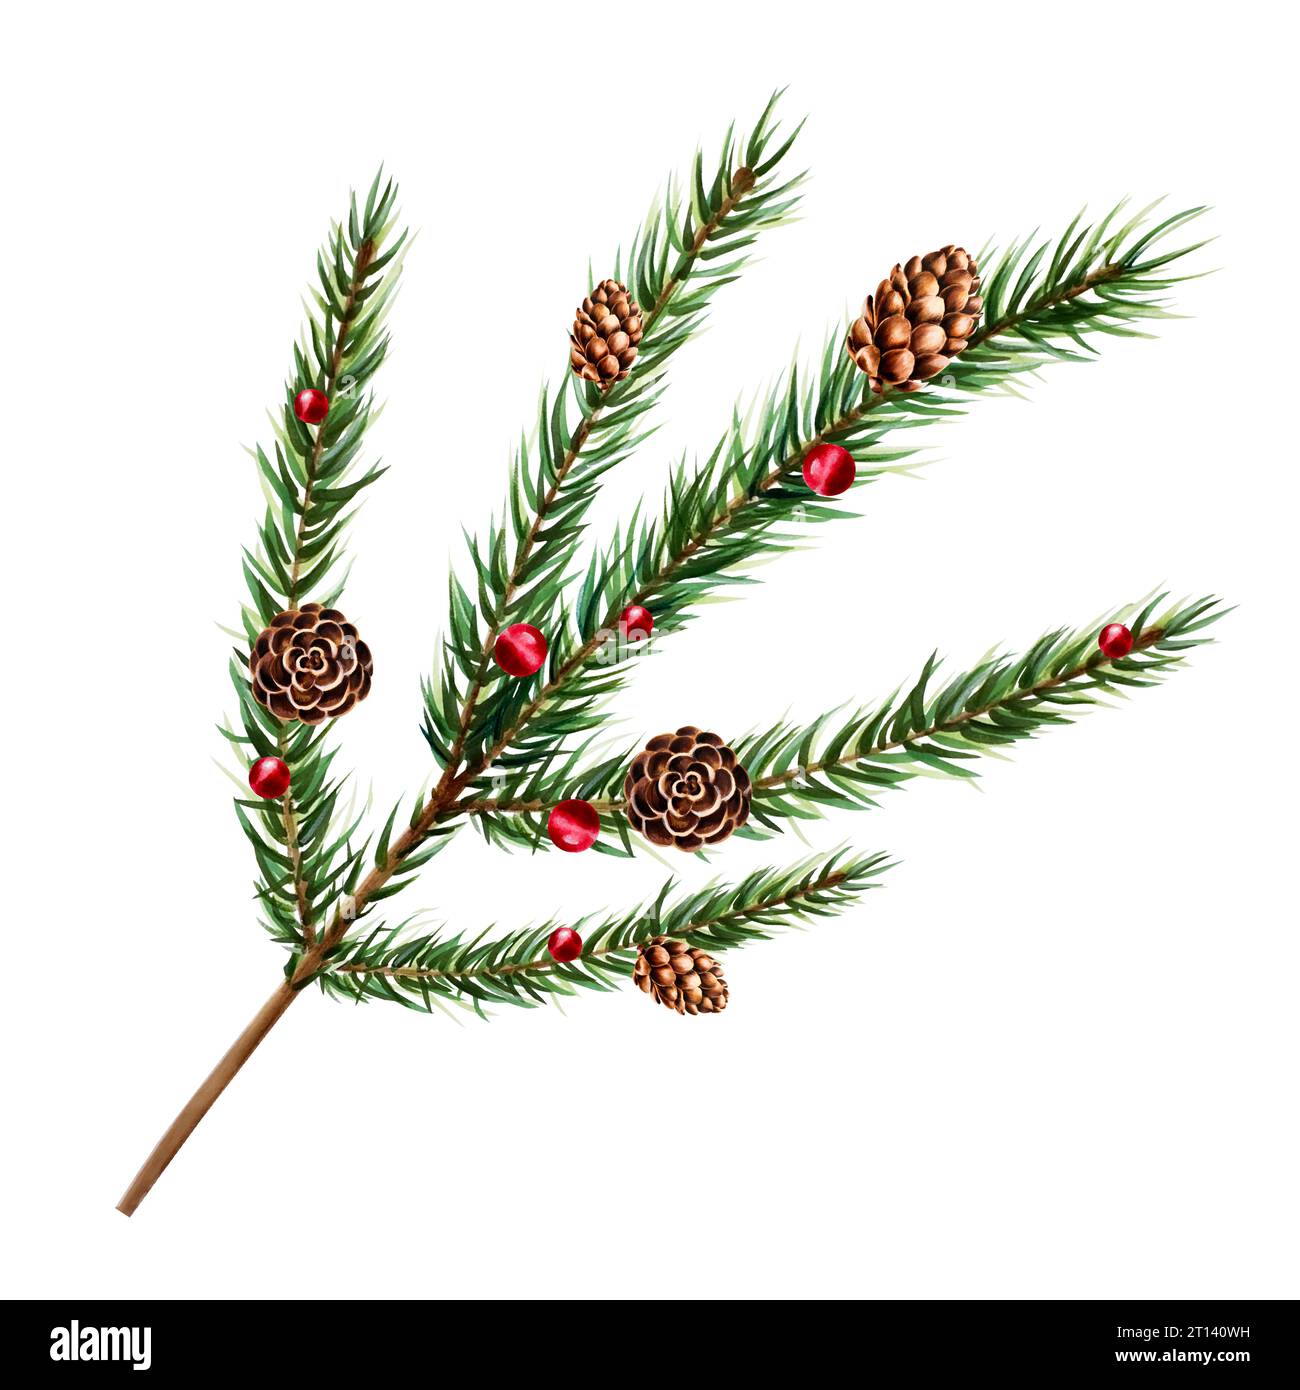 Watercolor christmas spruce and pine branch, cedar, fir and larch cone. New year botanical illustration of realistic red berries isolated on white bac Stock Photo